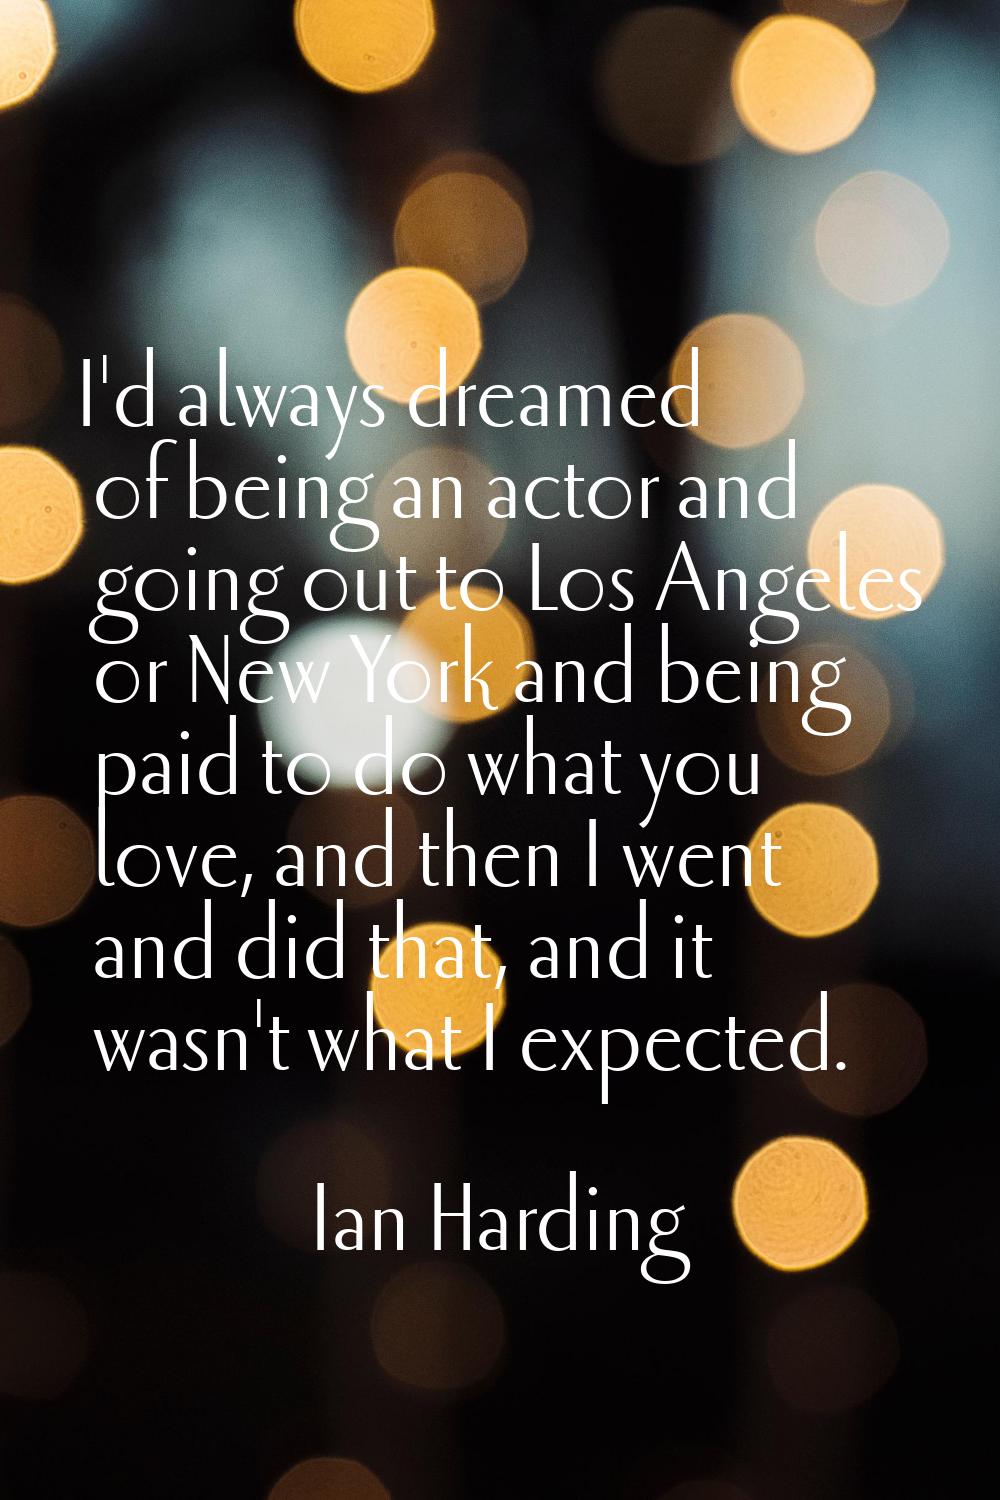 I'd always dreamed of being an actor and going out to Los Angeles or New York and being paid to do 